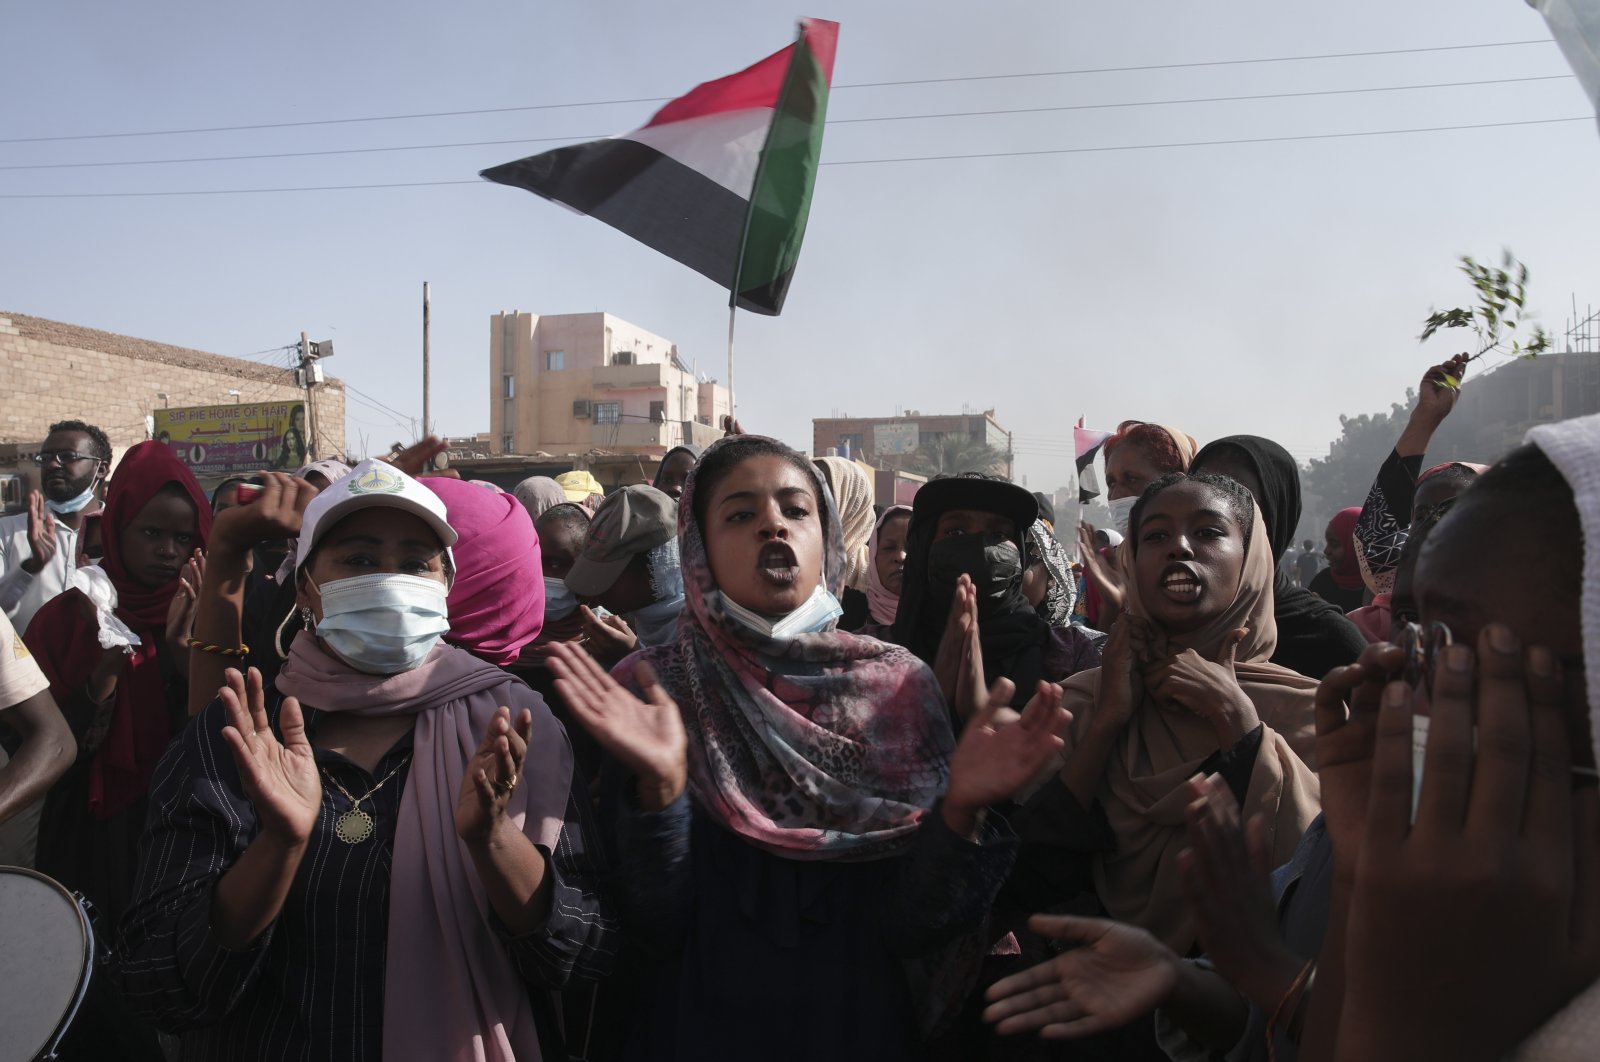 Sudanese protesters demonstrate against the military coup that ousted the government in Khartoum, Sudan, Nov. 17, 2021. (AP File Photo)